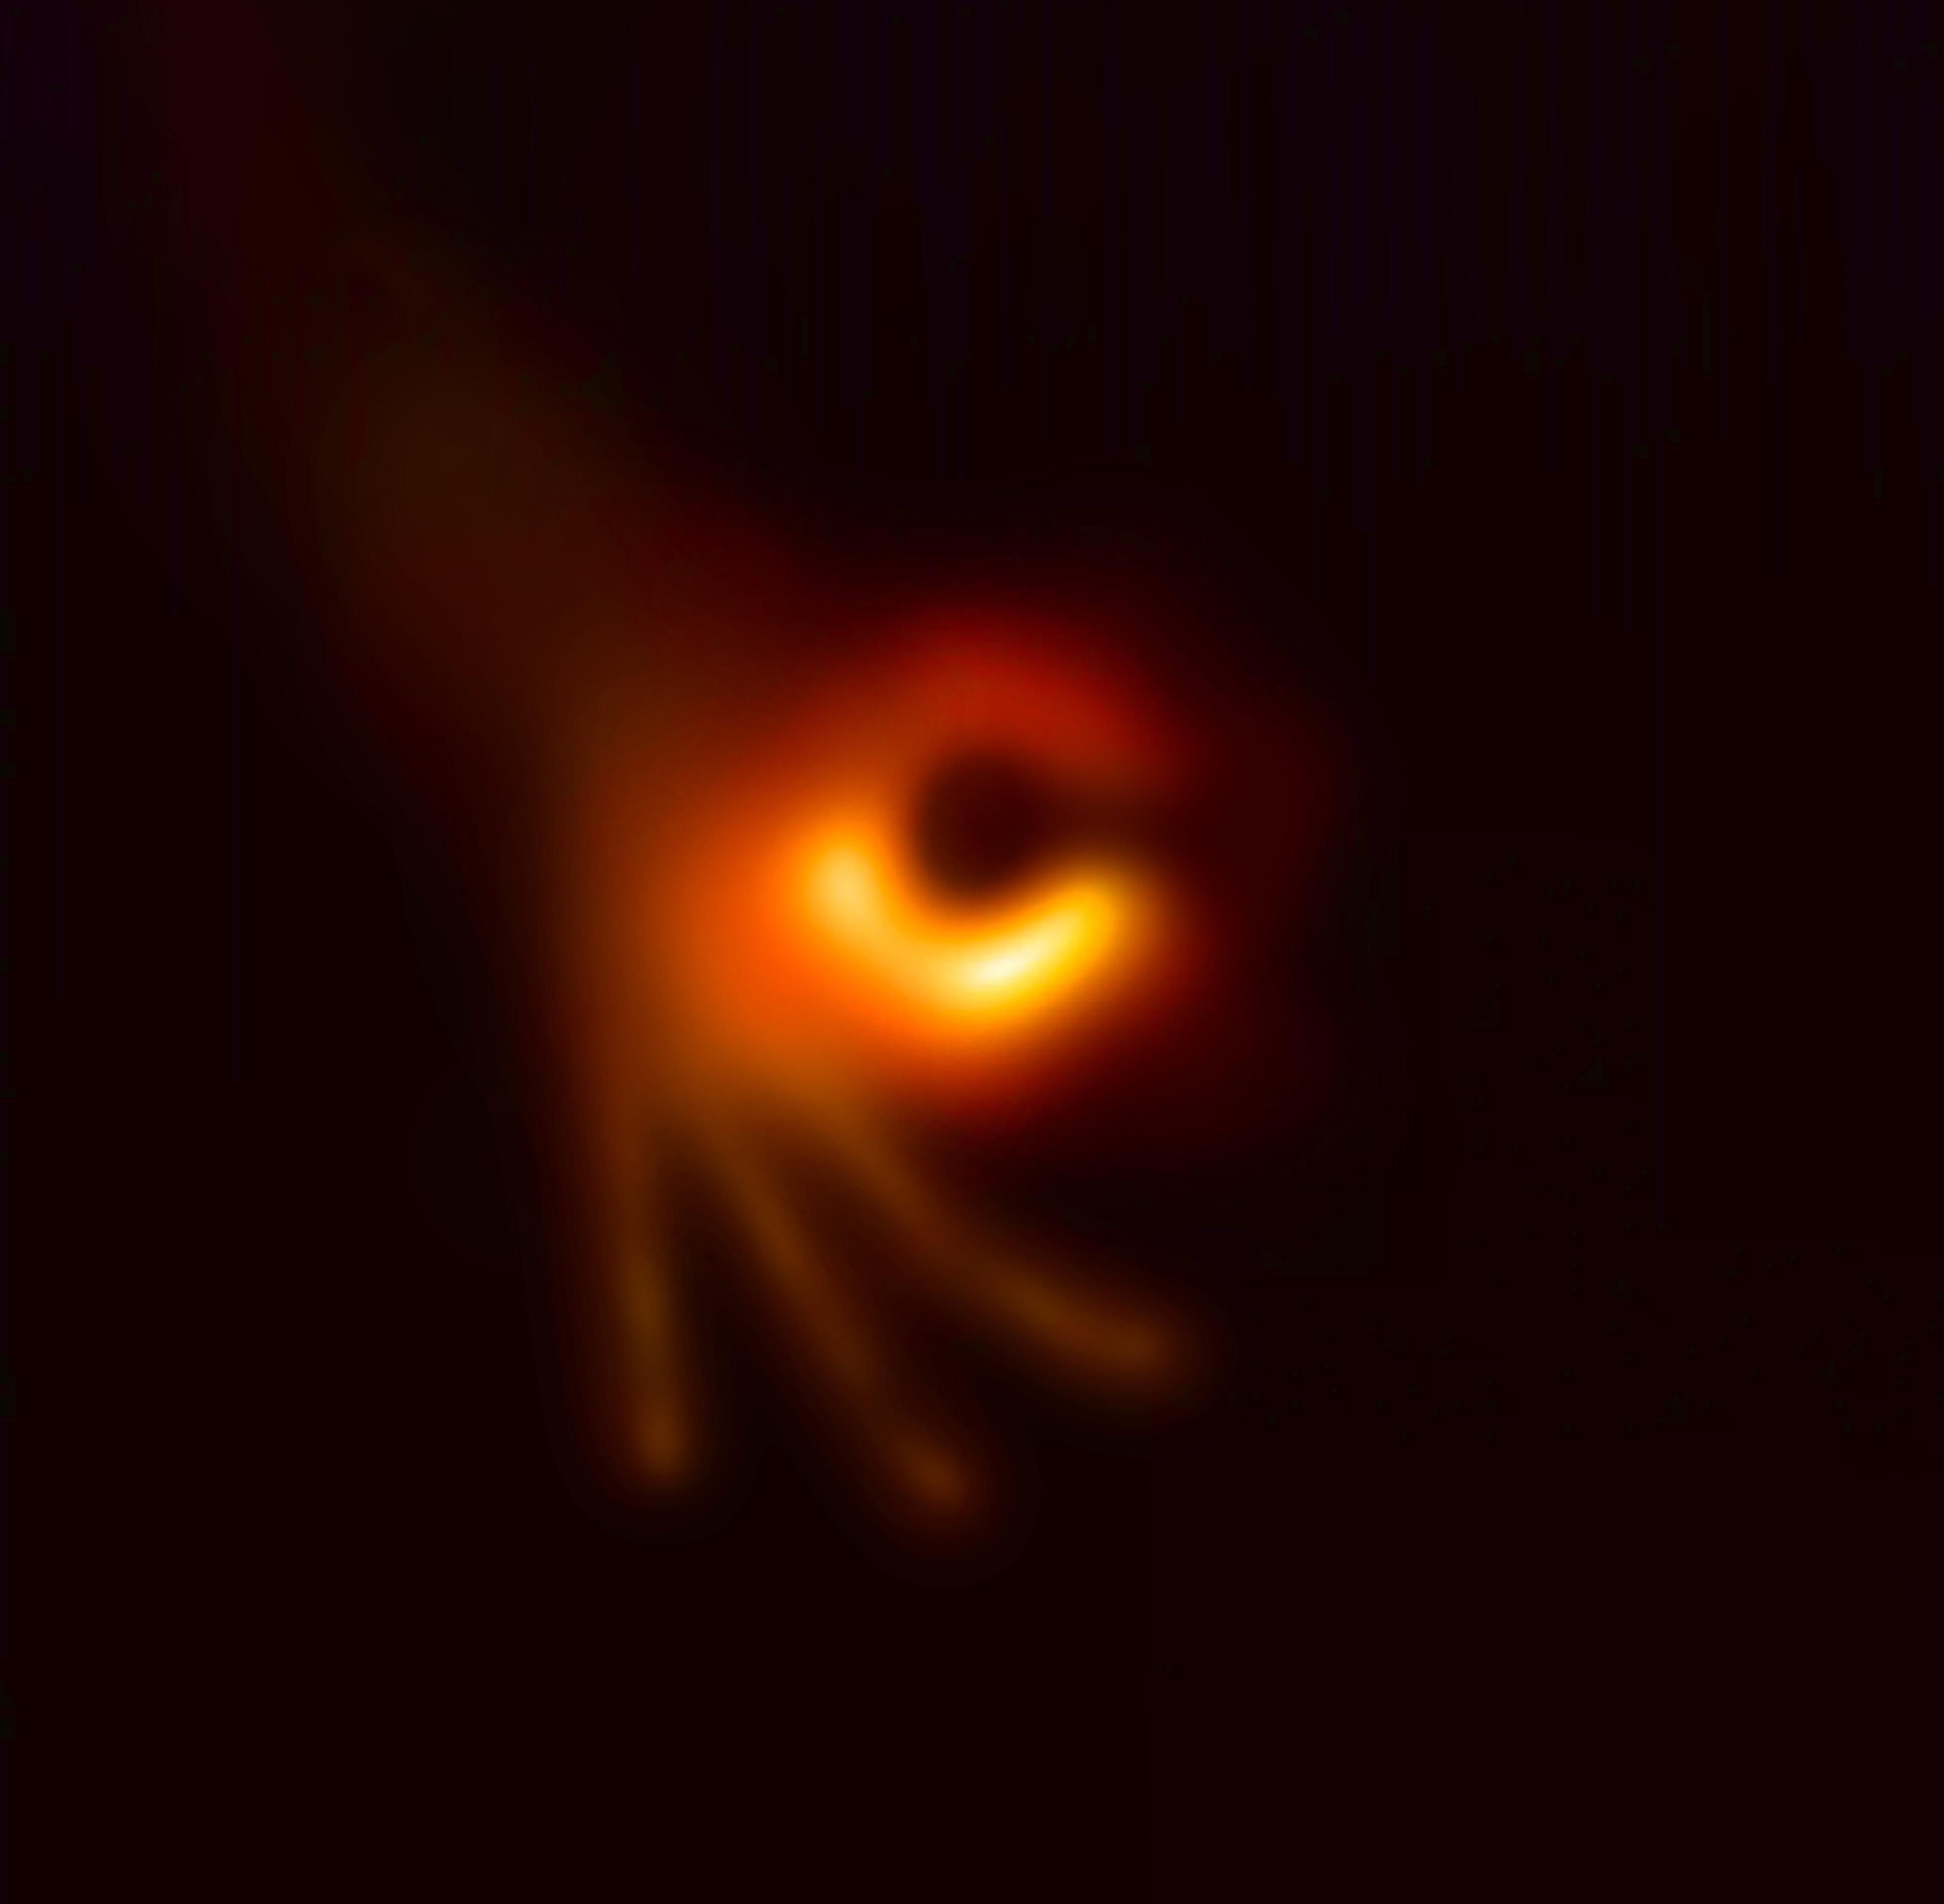 World’s first photo of a black hole